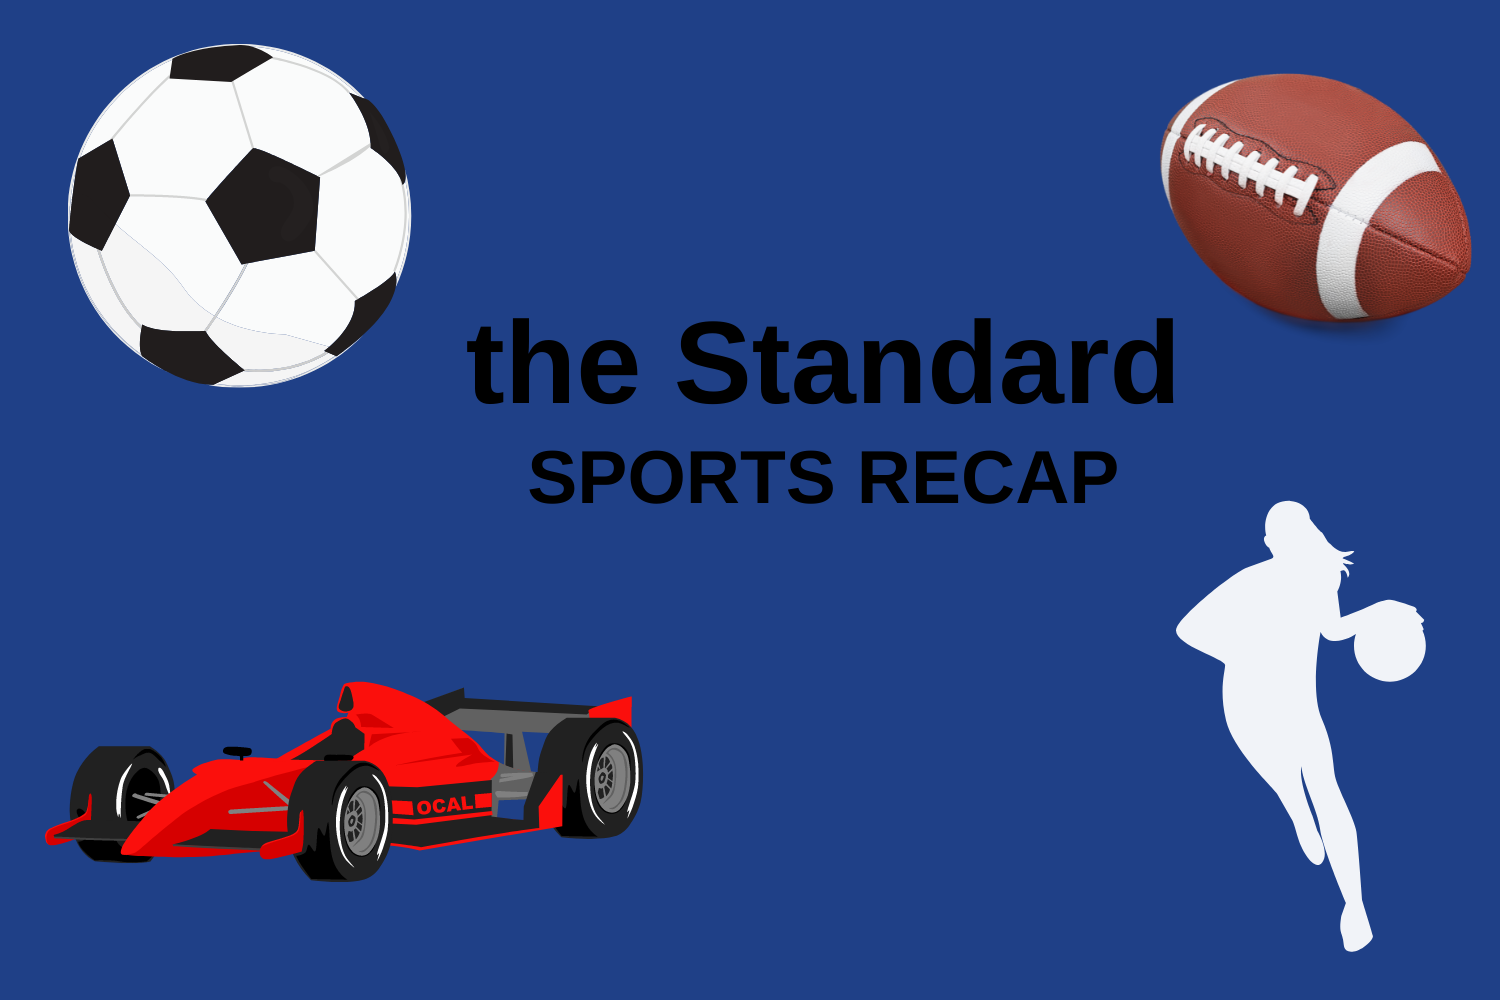 The Standard Sports Recap: soccer teams compete for strongest players during summer signings